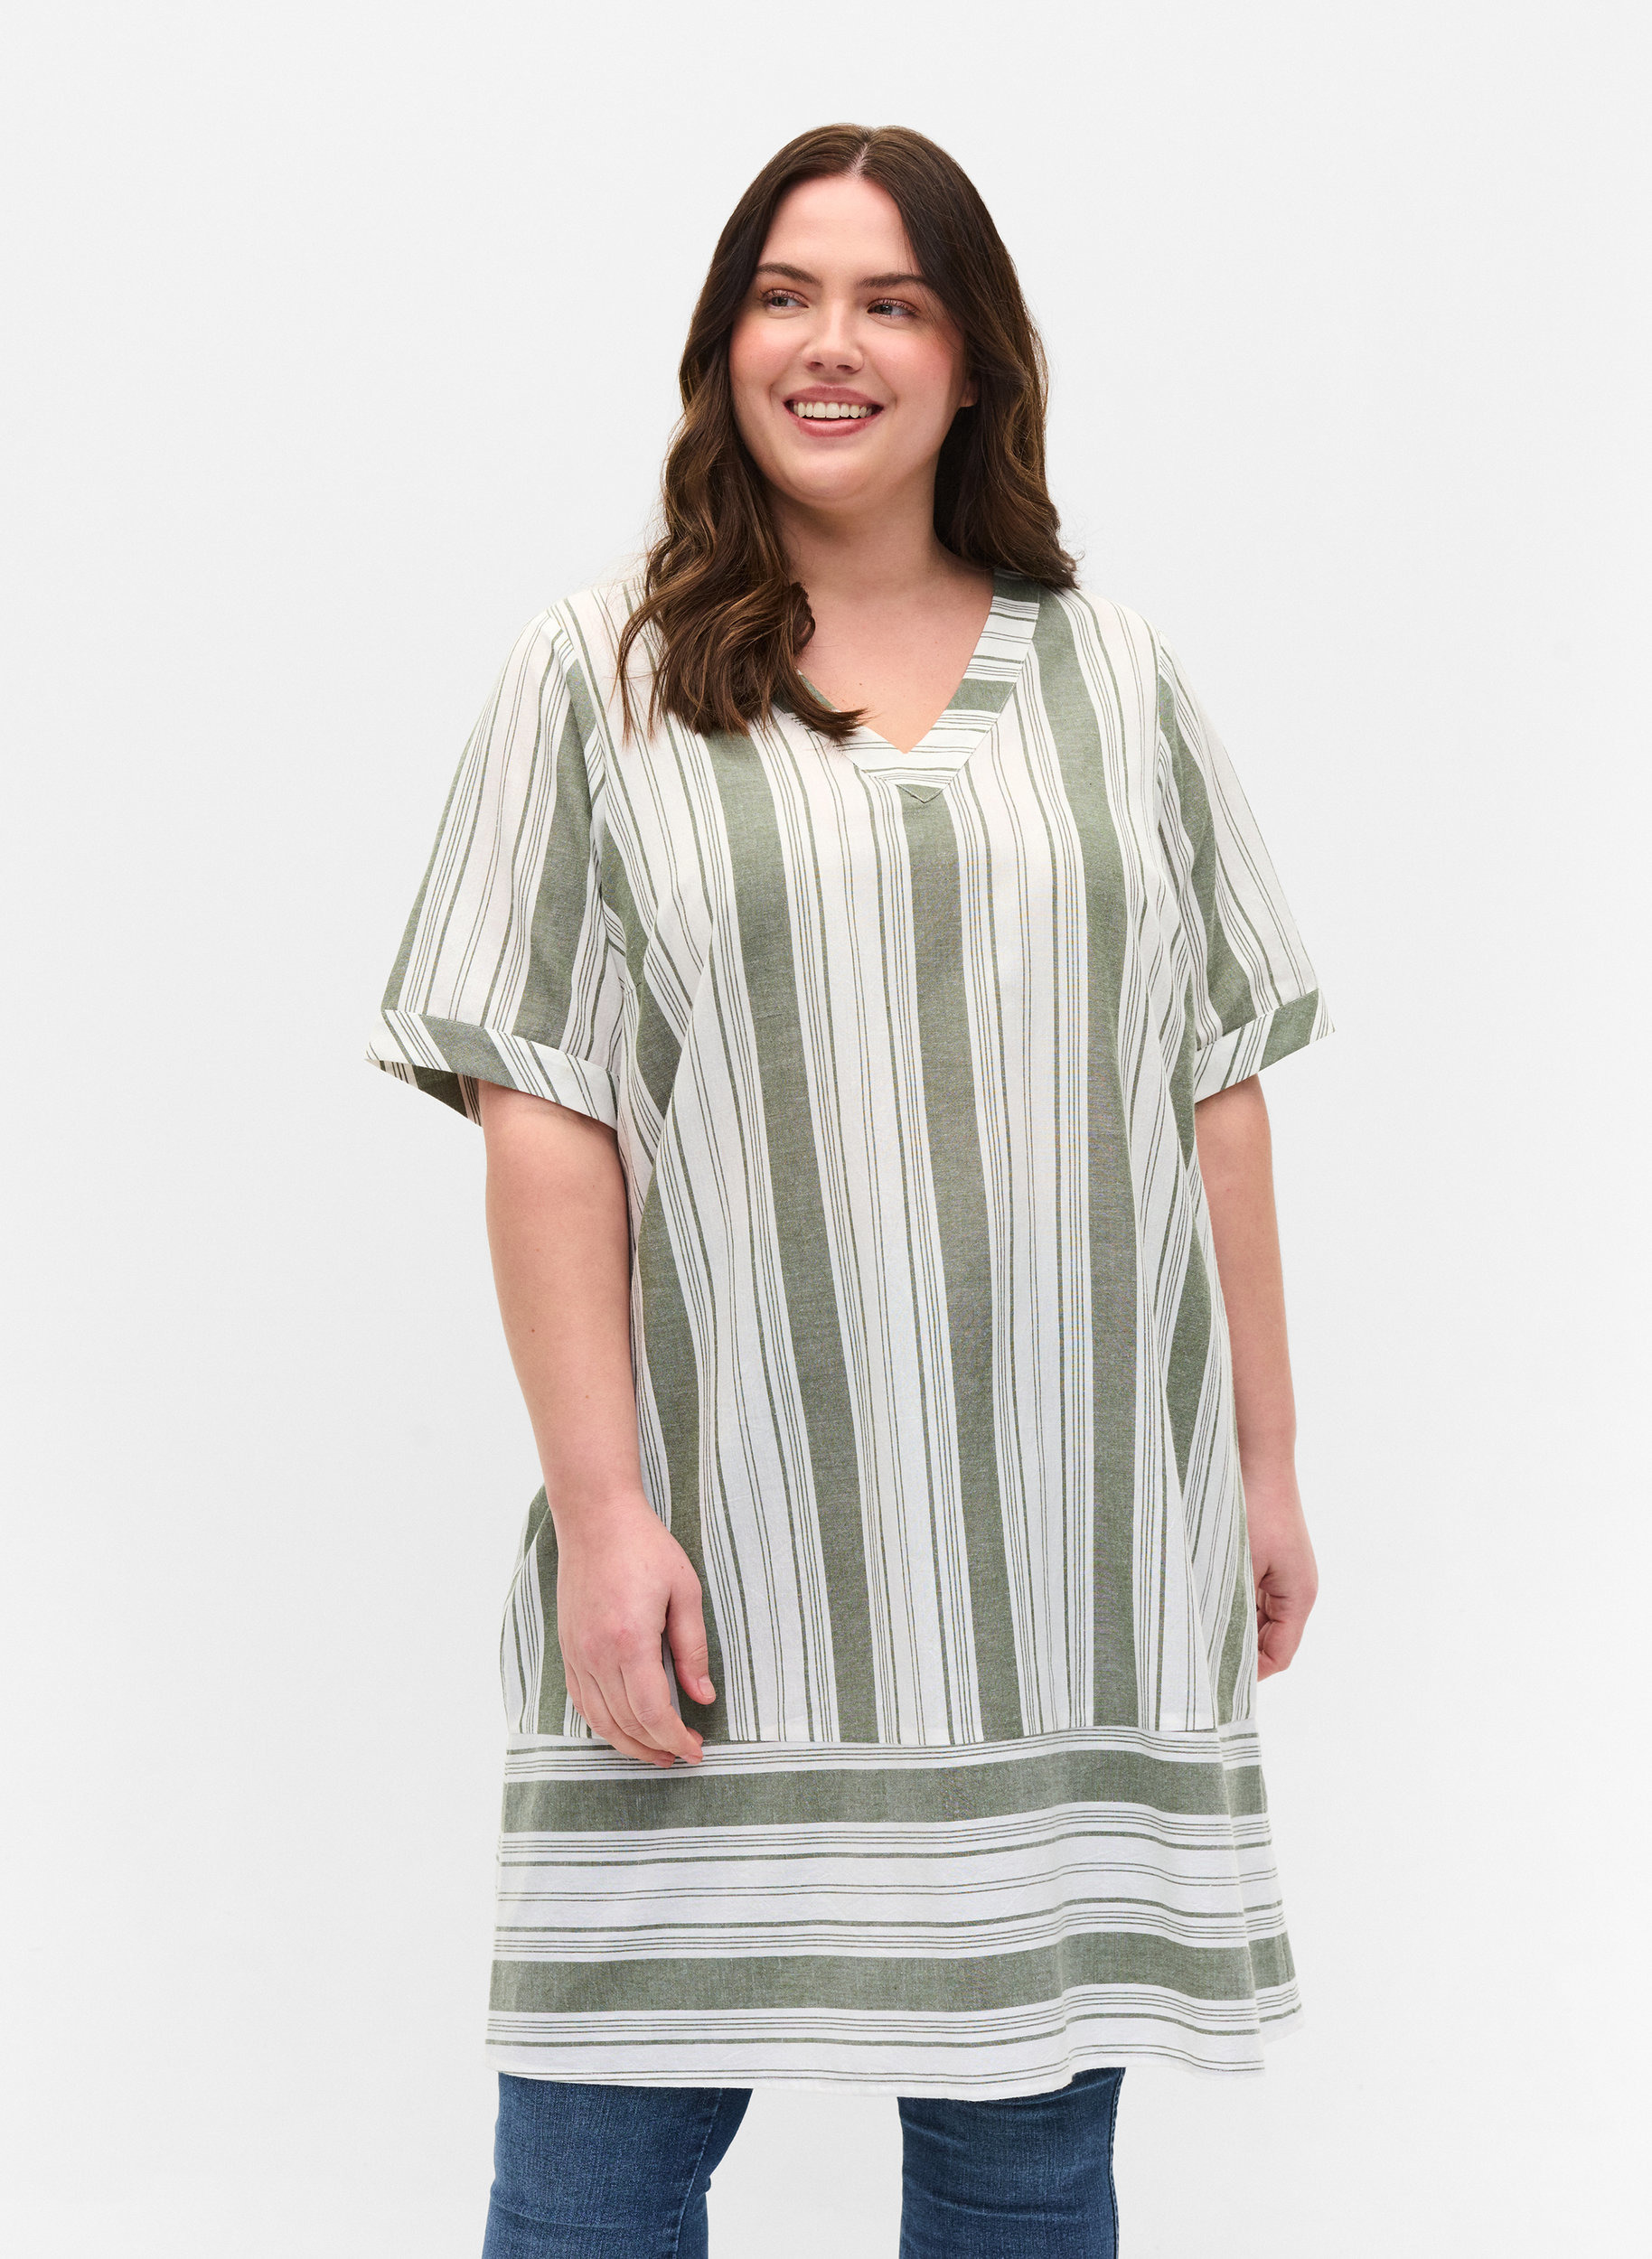 Striped cotton dress with short sleeves, Thyme Stripe, Model